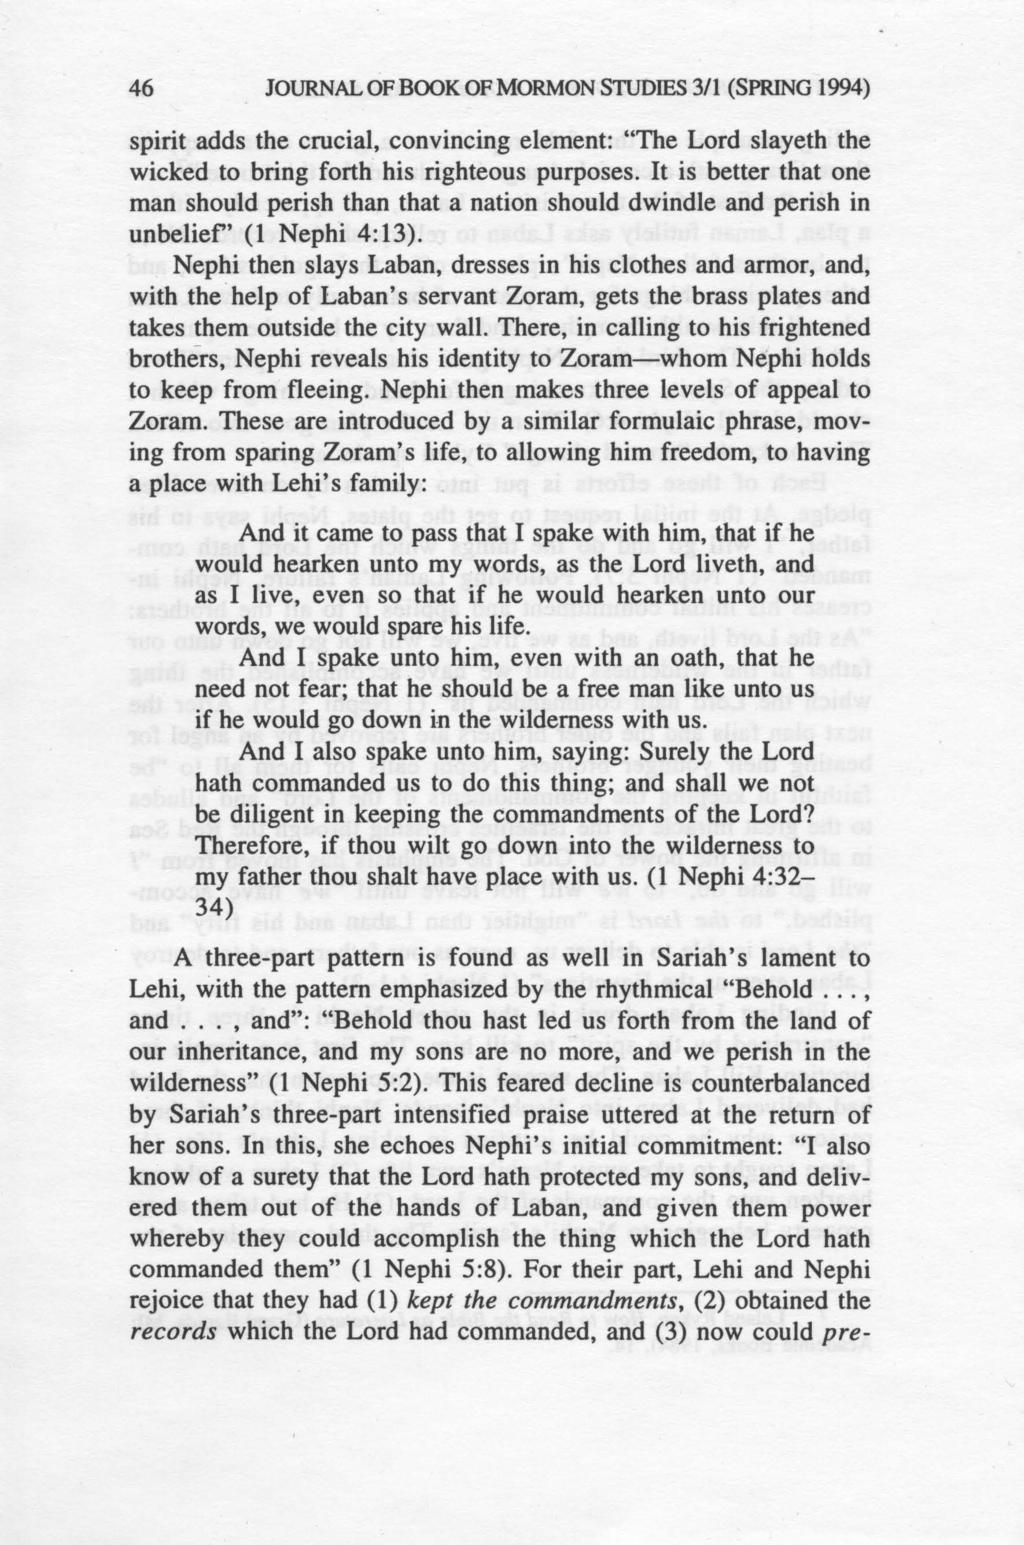 46 JOURNAL OF BOOK OF MORMON STUDIES 3/1 (SPRING 1994) spirit adds the crucial, convincing element: "The Lord slayeth the wicked to bring forth his righteous purposes.